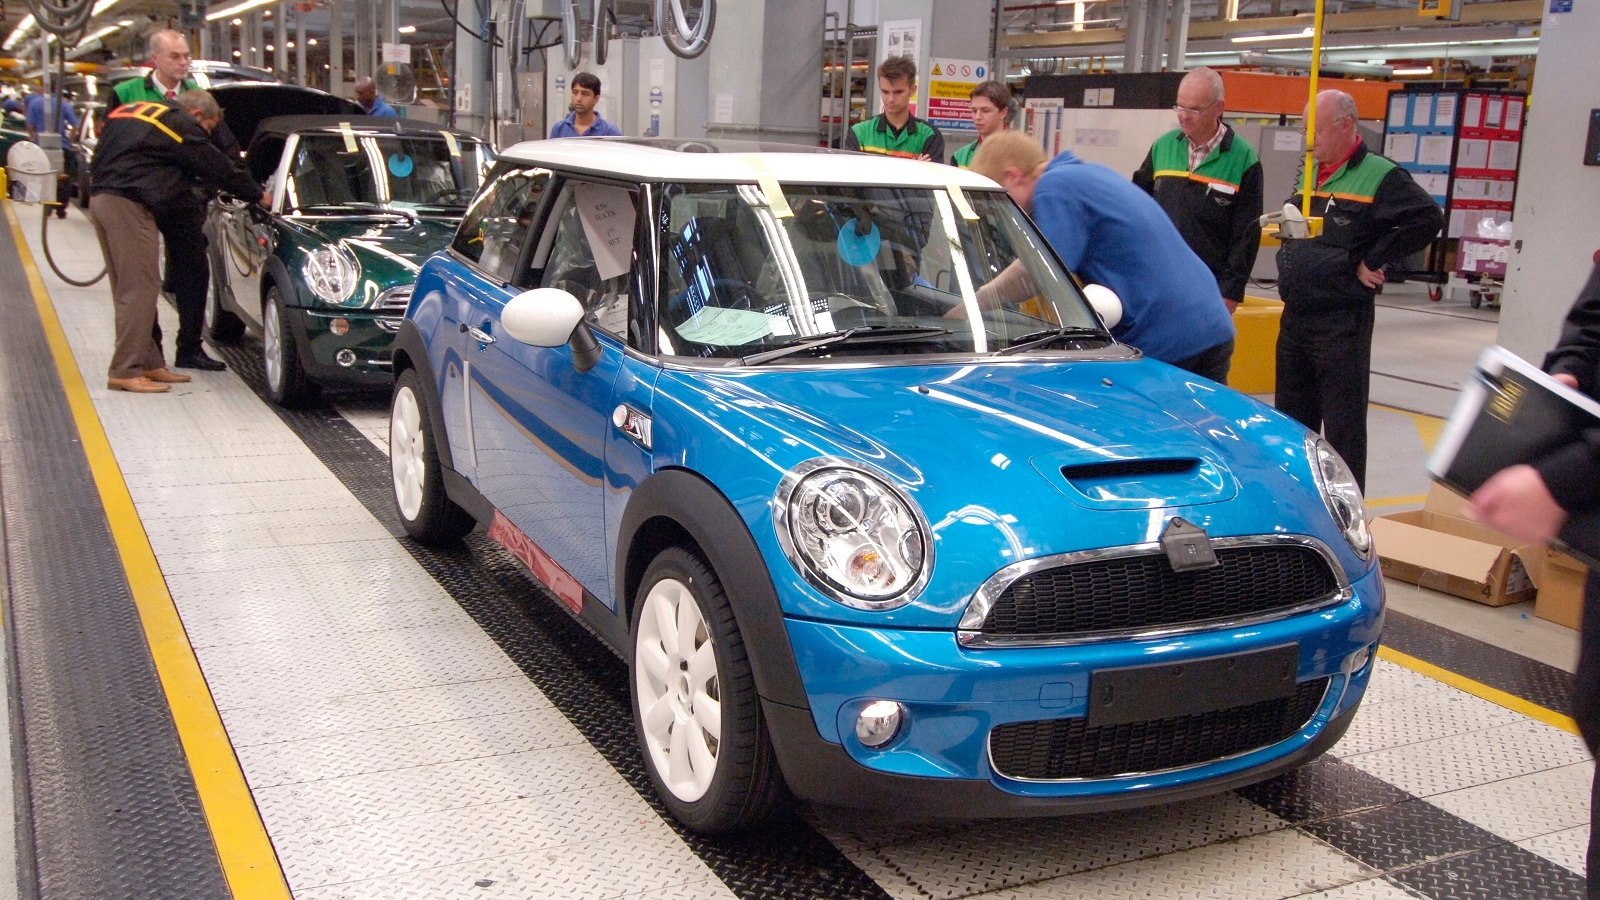 Modern-day MINI assembly at MINI Plant Oxford, England, Mar 2013 (the plant's 100th birthday)